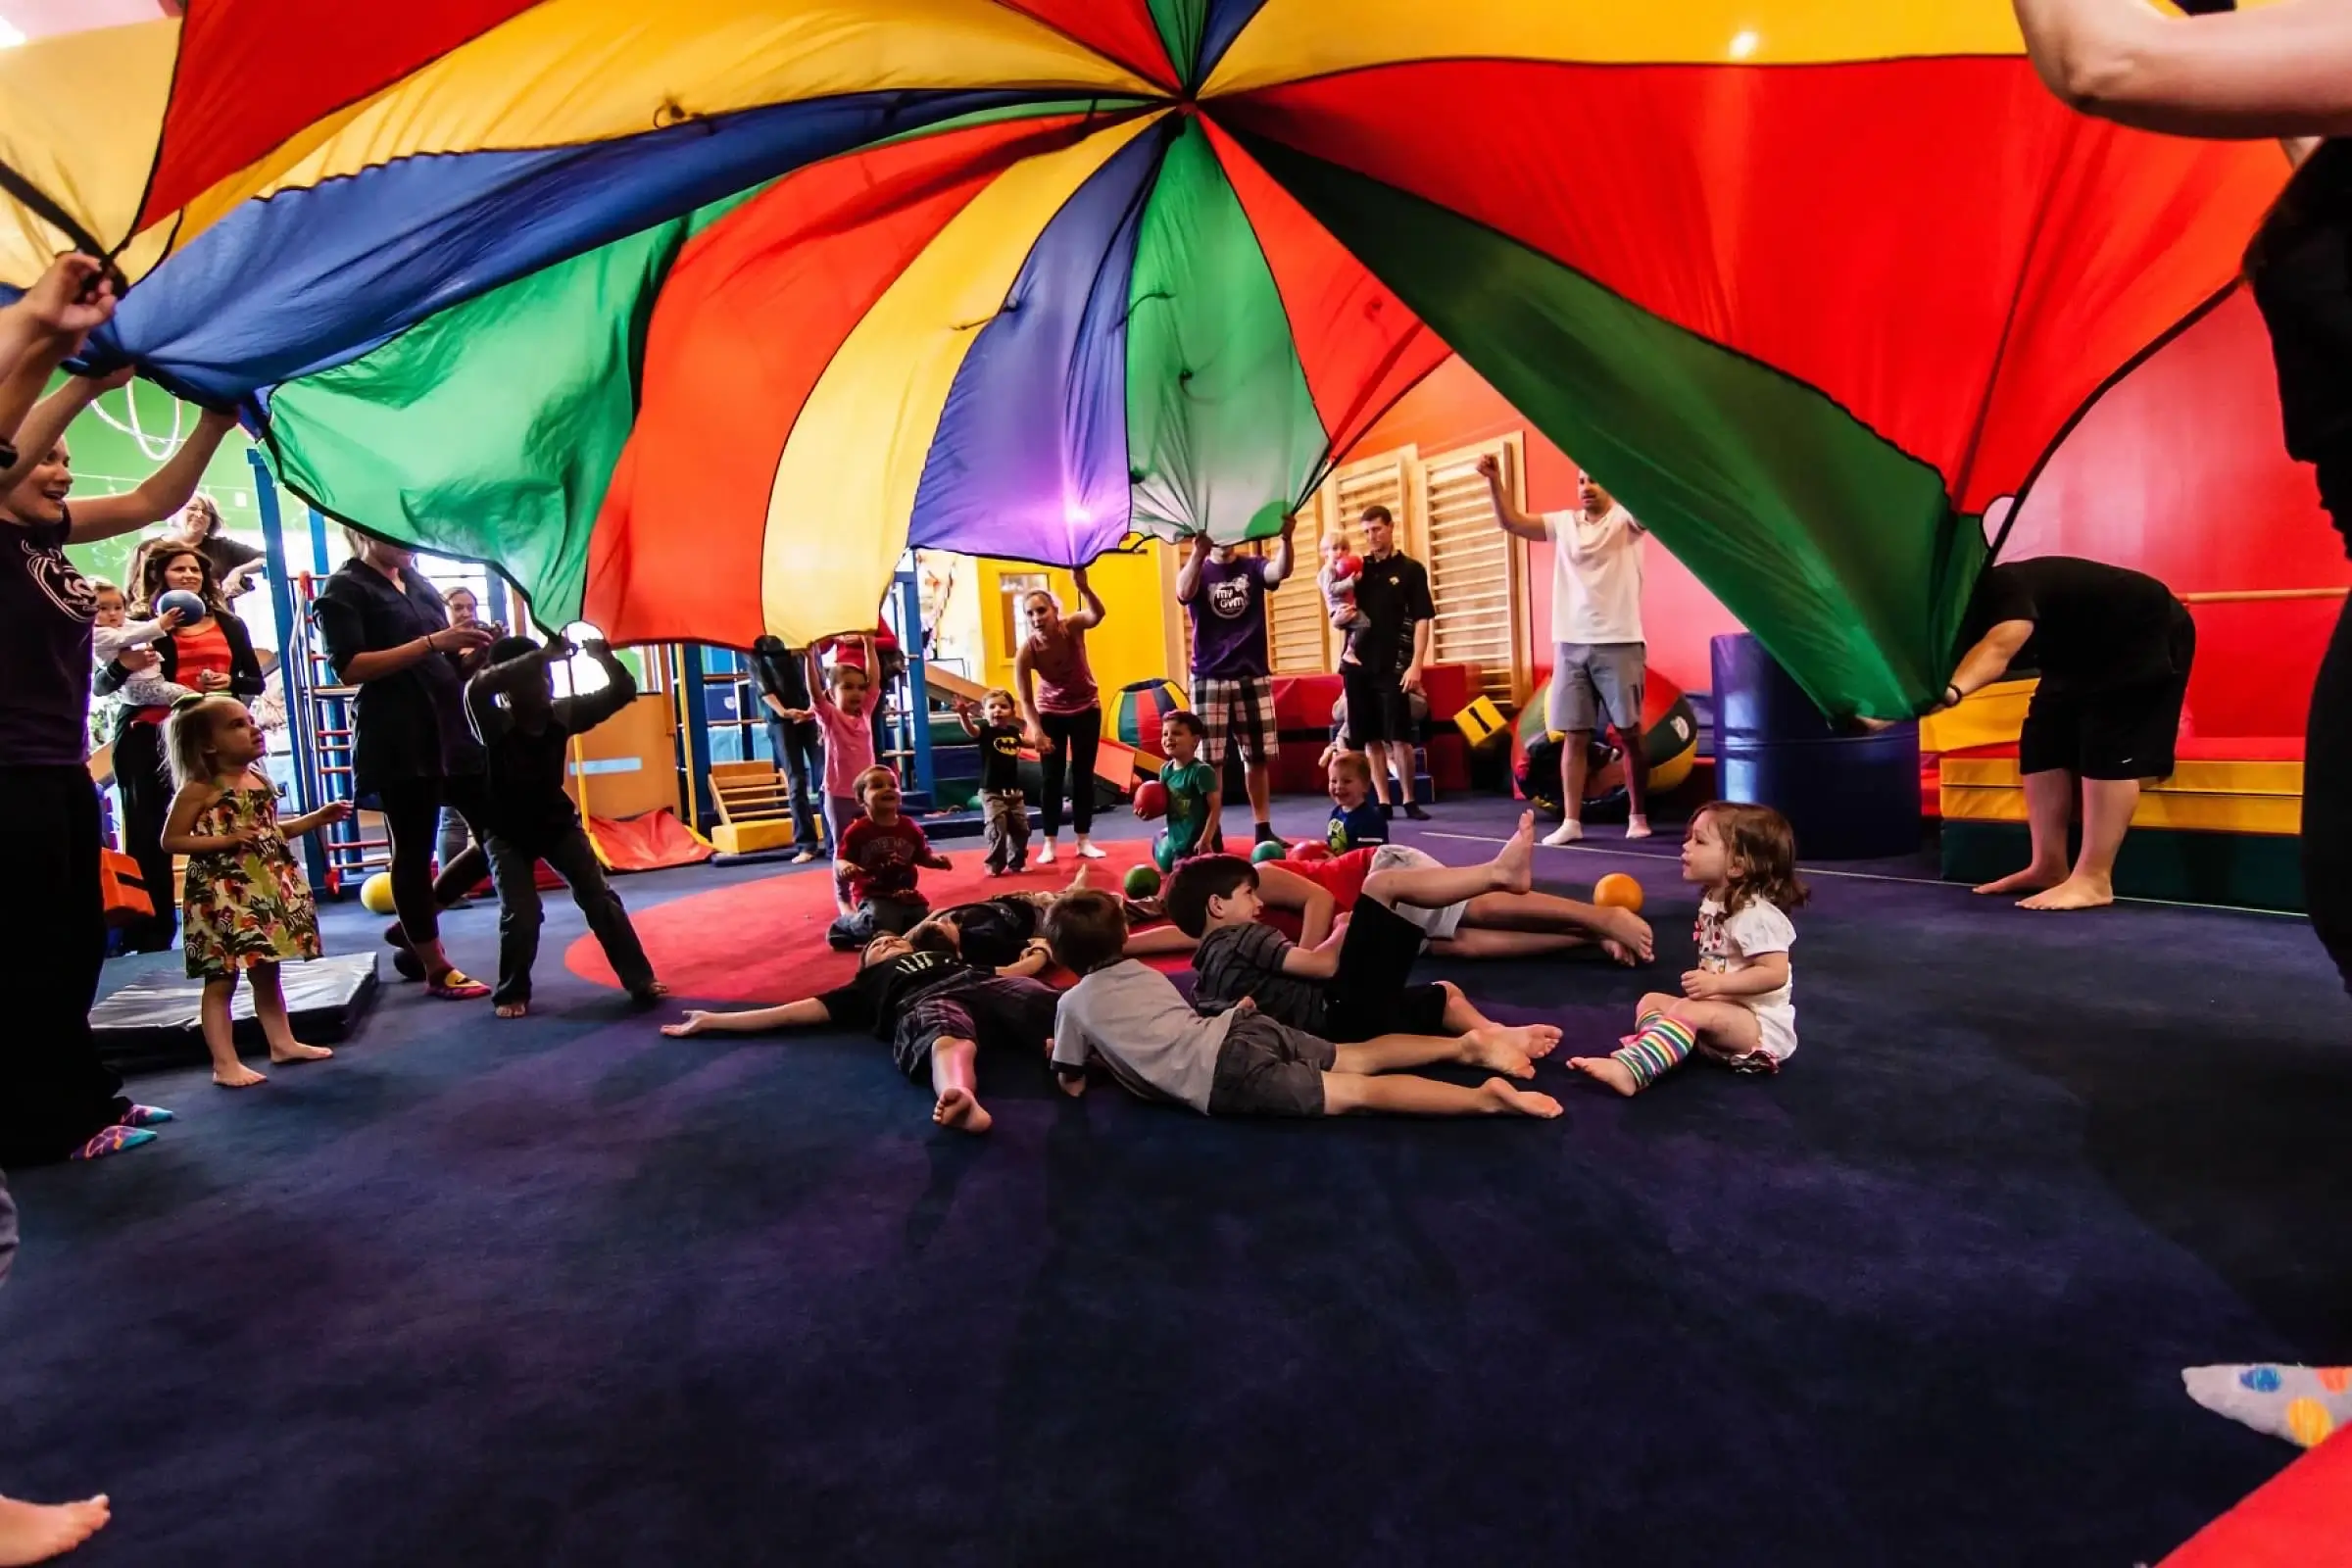 A group of kids engaged in fitness activities standing around a colorful parachute.